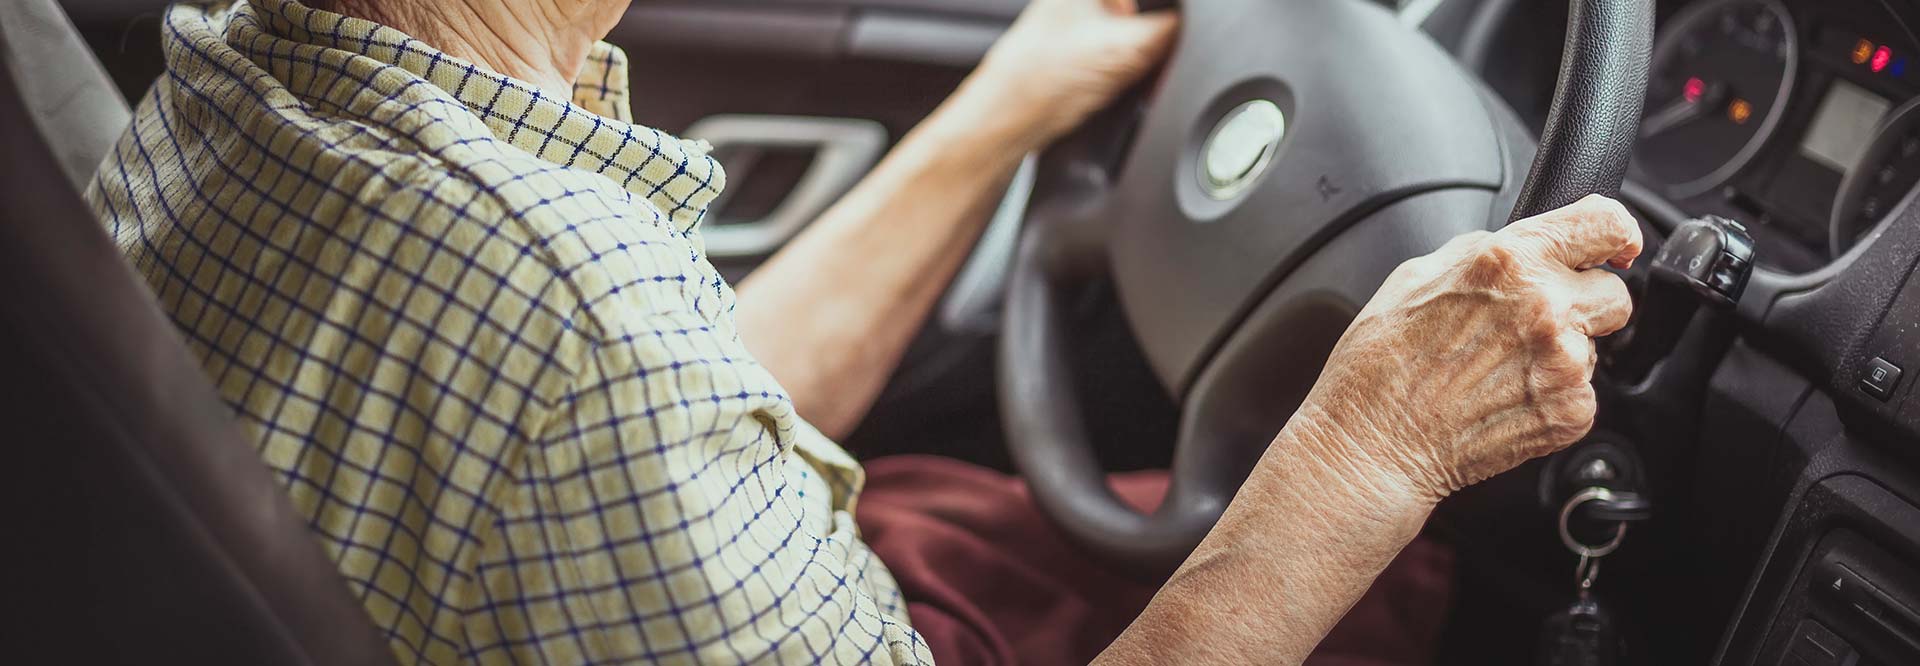 Can a doctor stop an elderly person from driving?